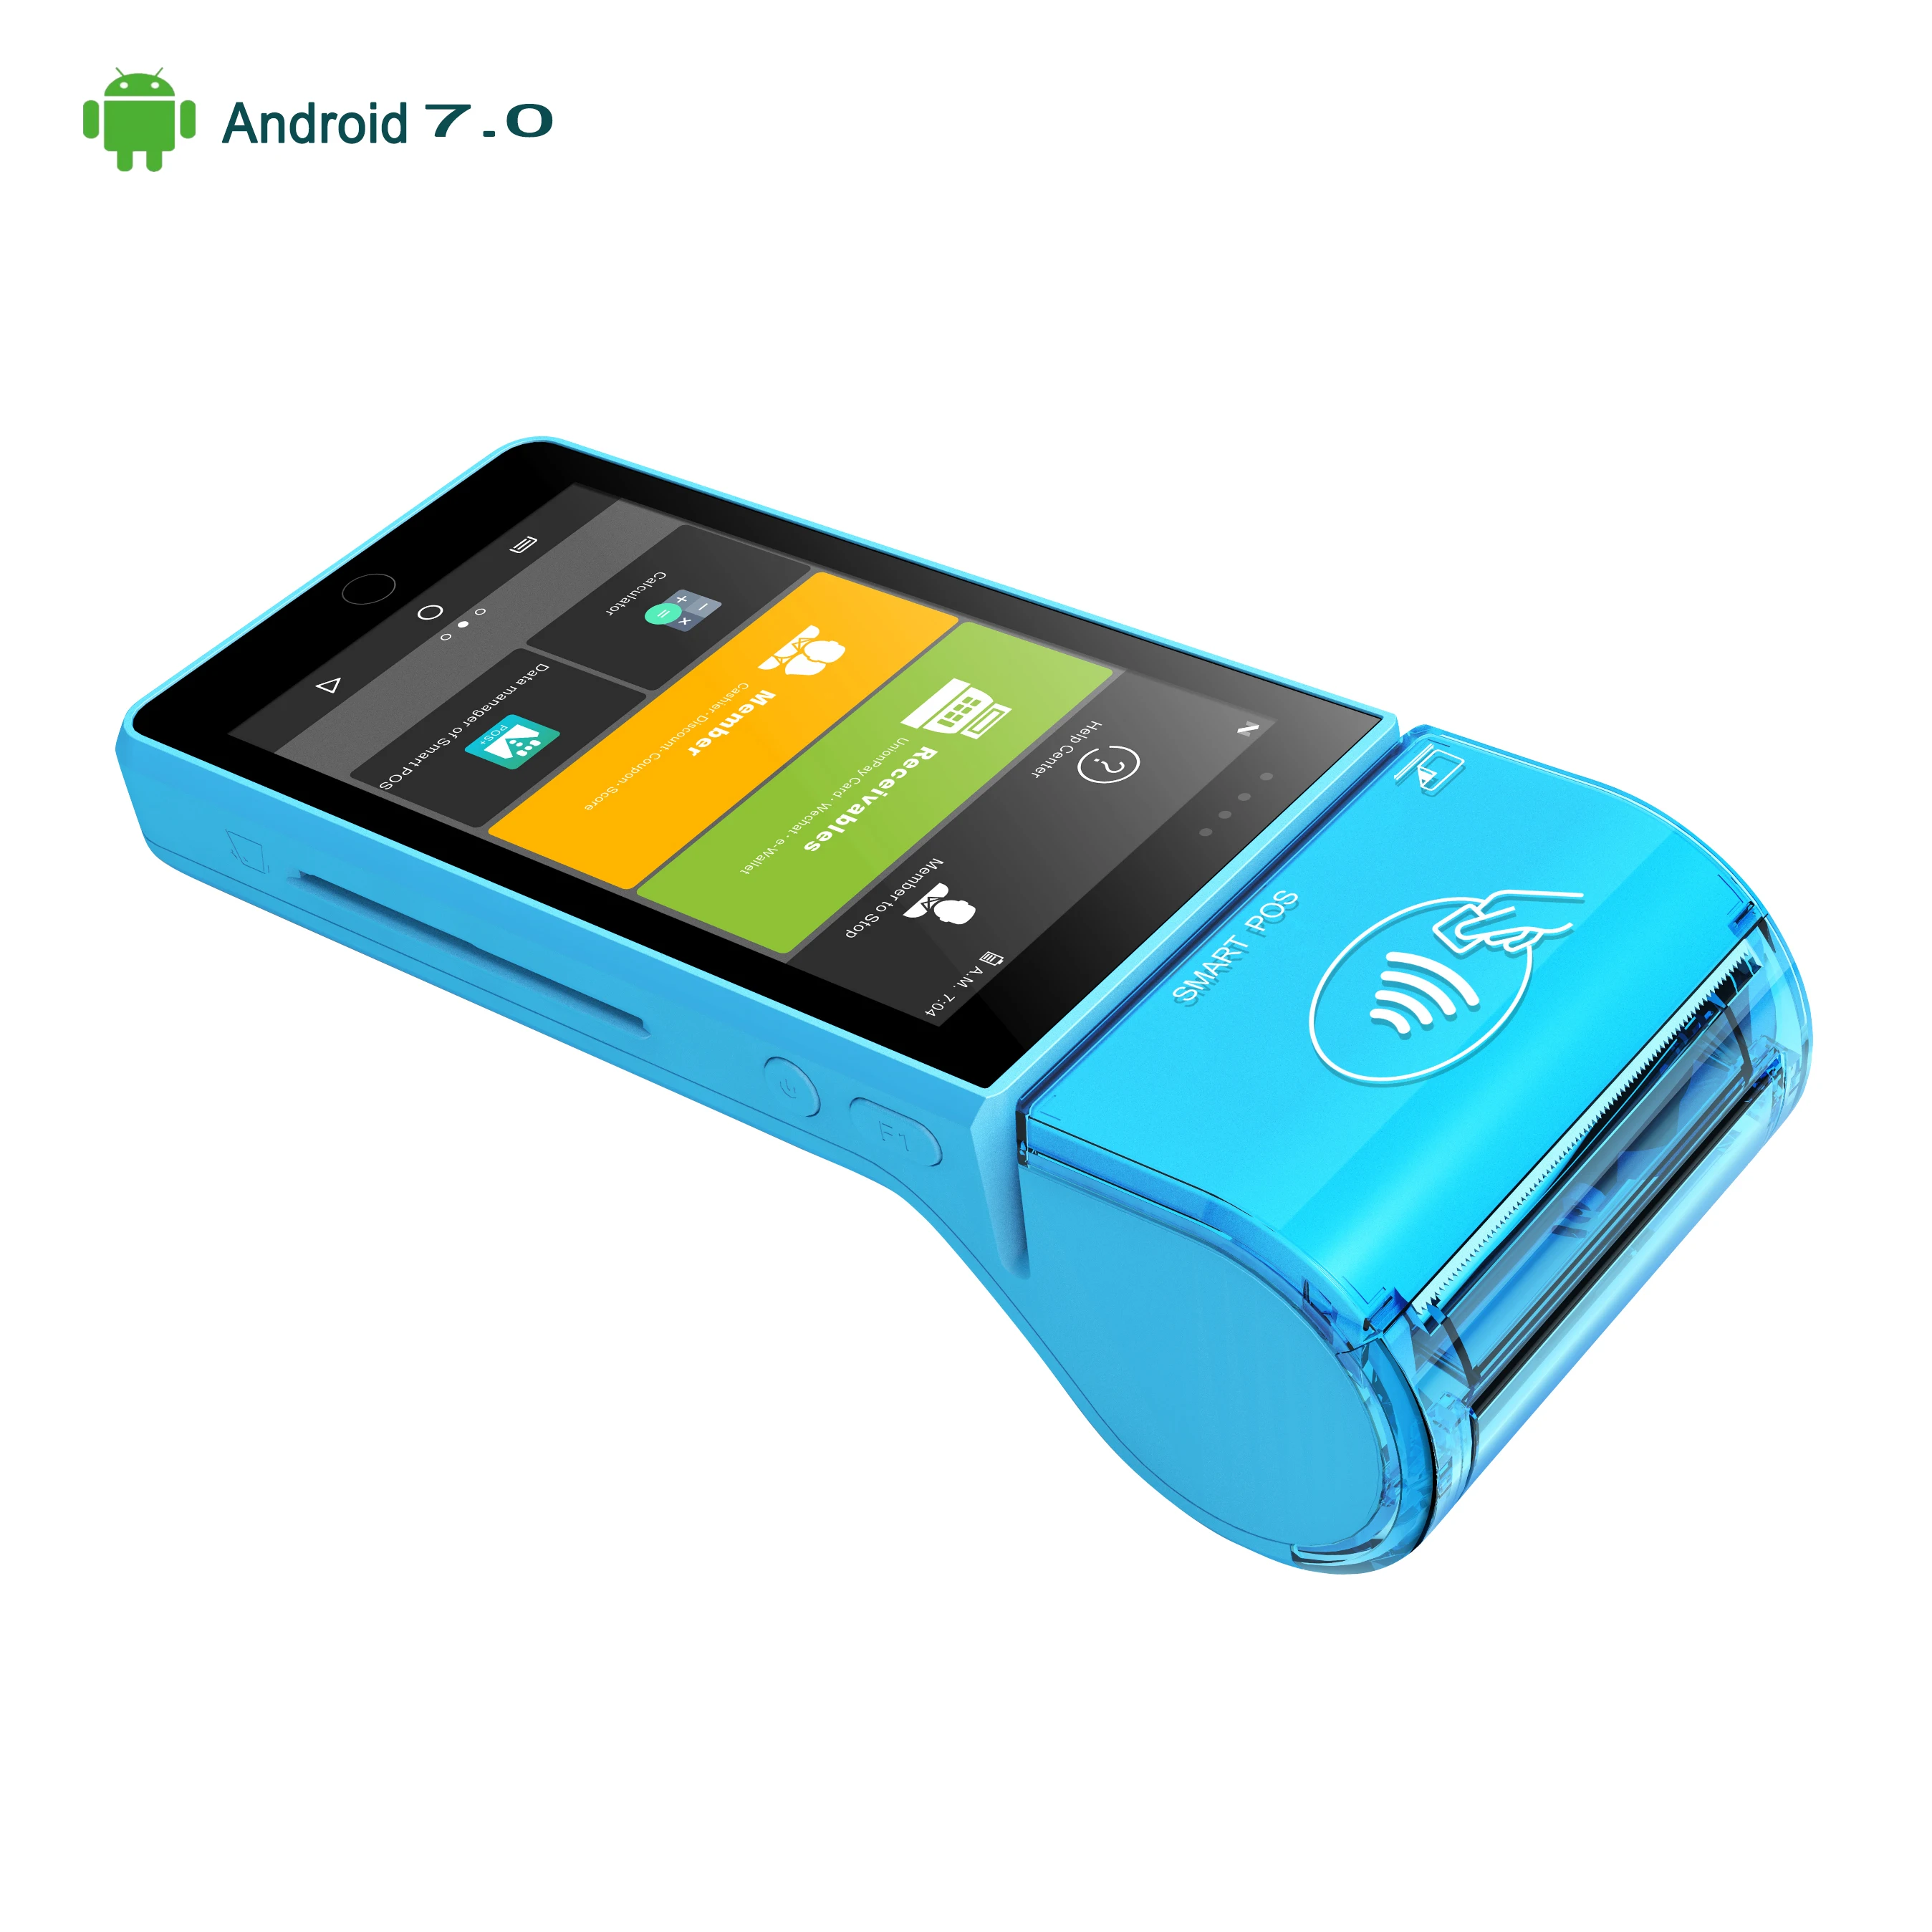 All in one slim smart handheld android pos terminal with printer and card readers